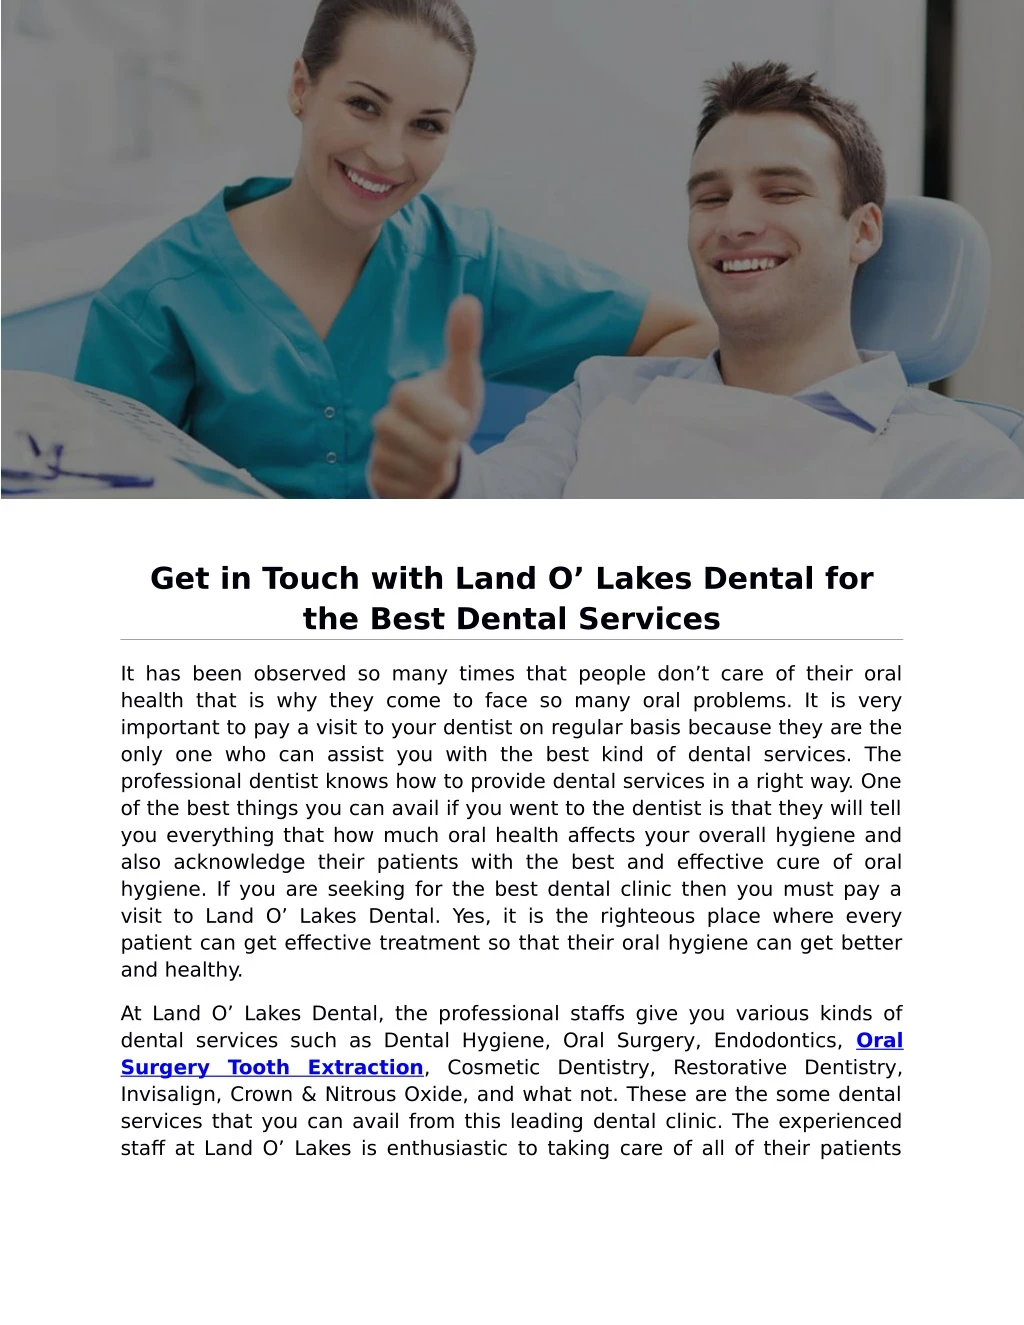 get in touch with land o lakes dental